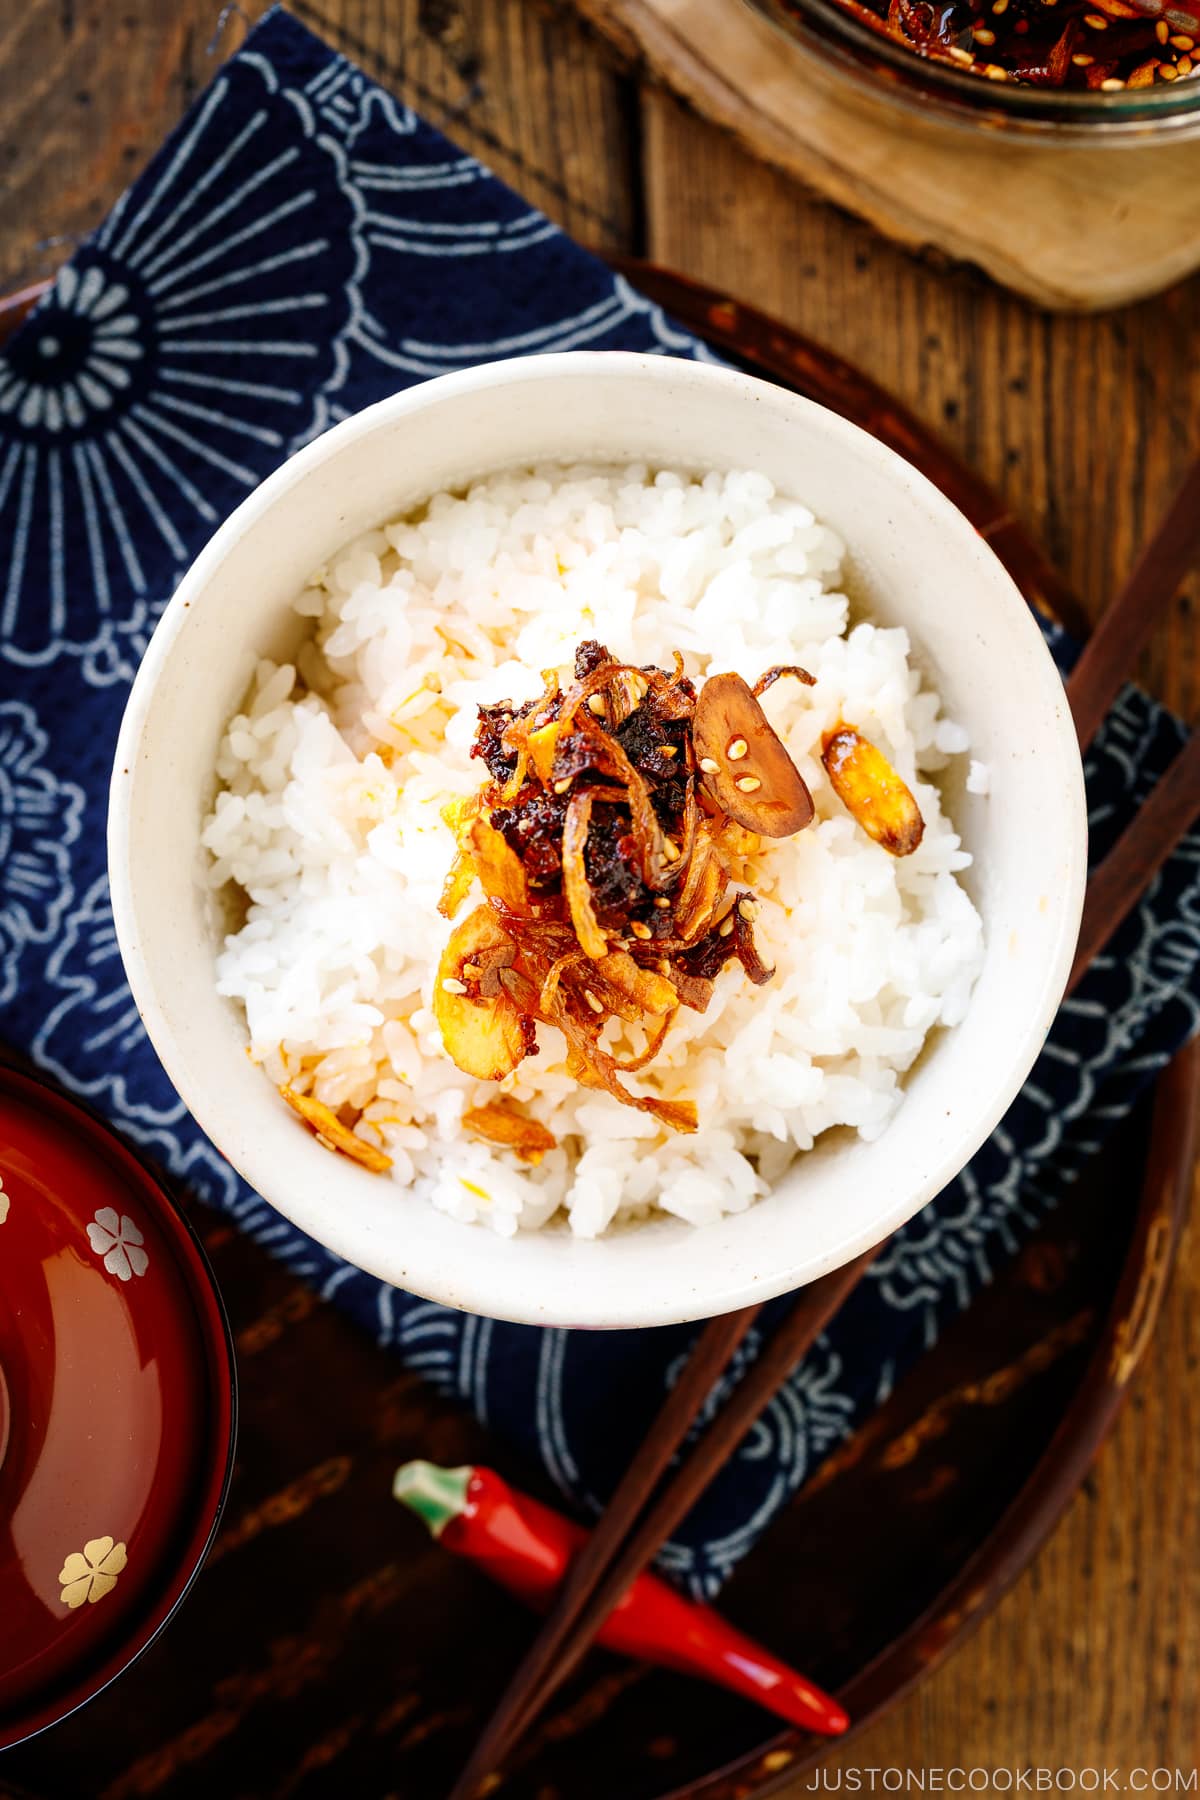 A Japanese rice bowl containing steamed rice topped with Crunchy Garlic Chili Oil.